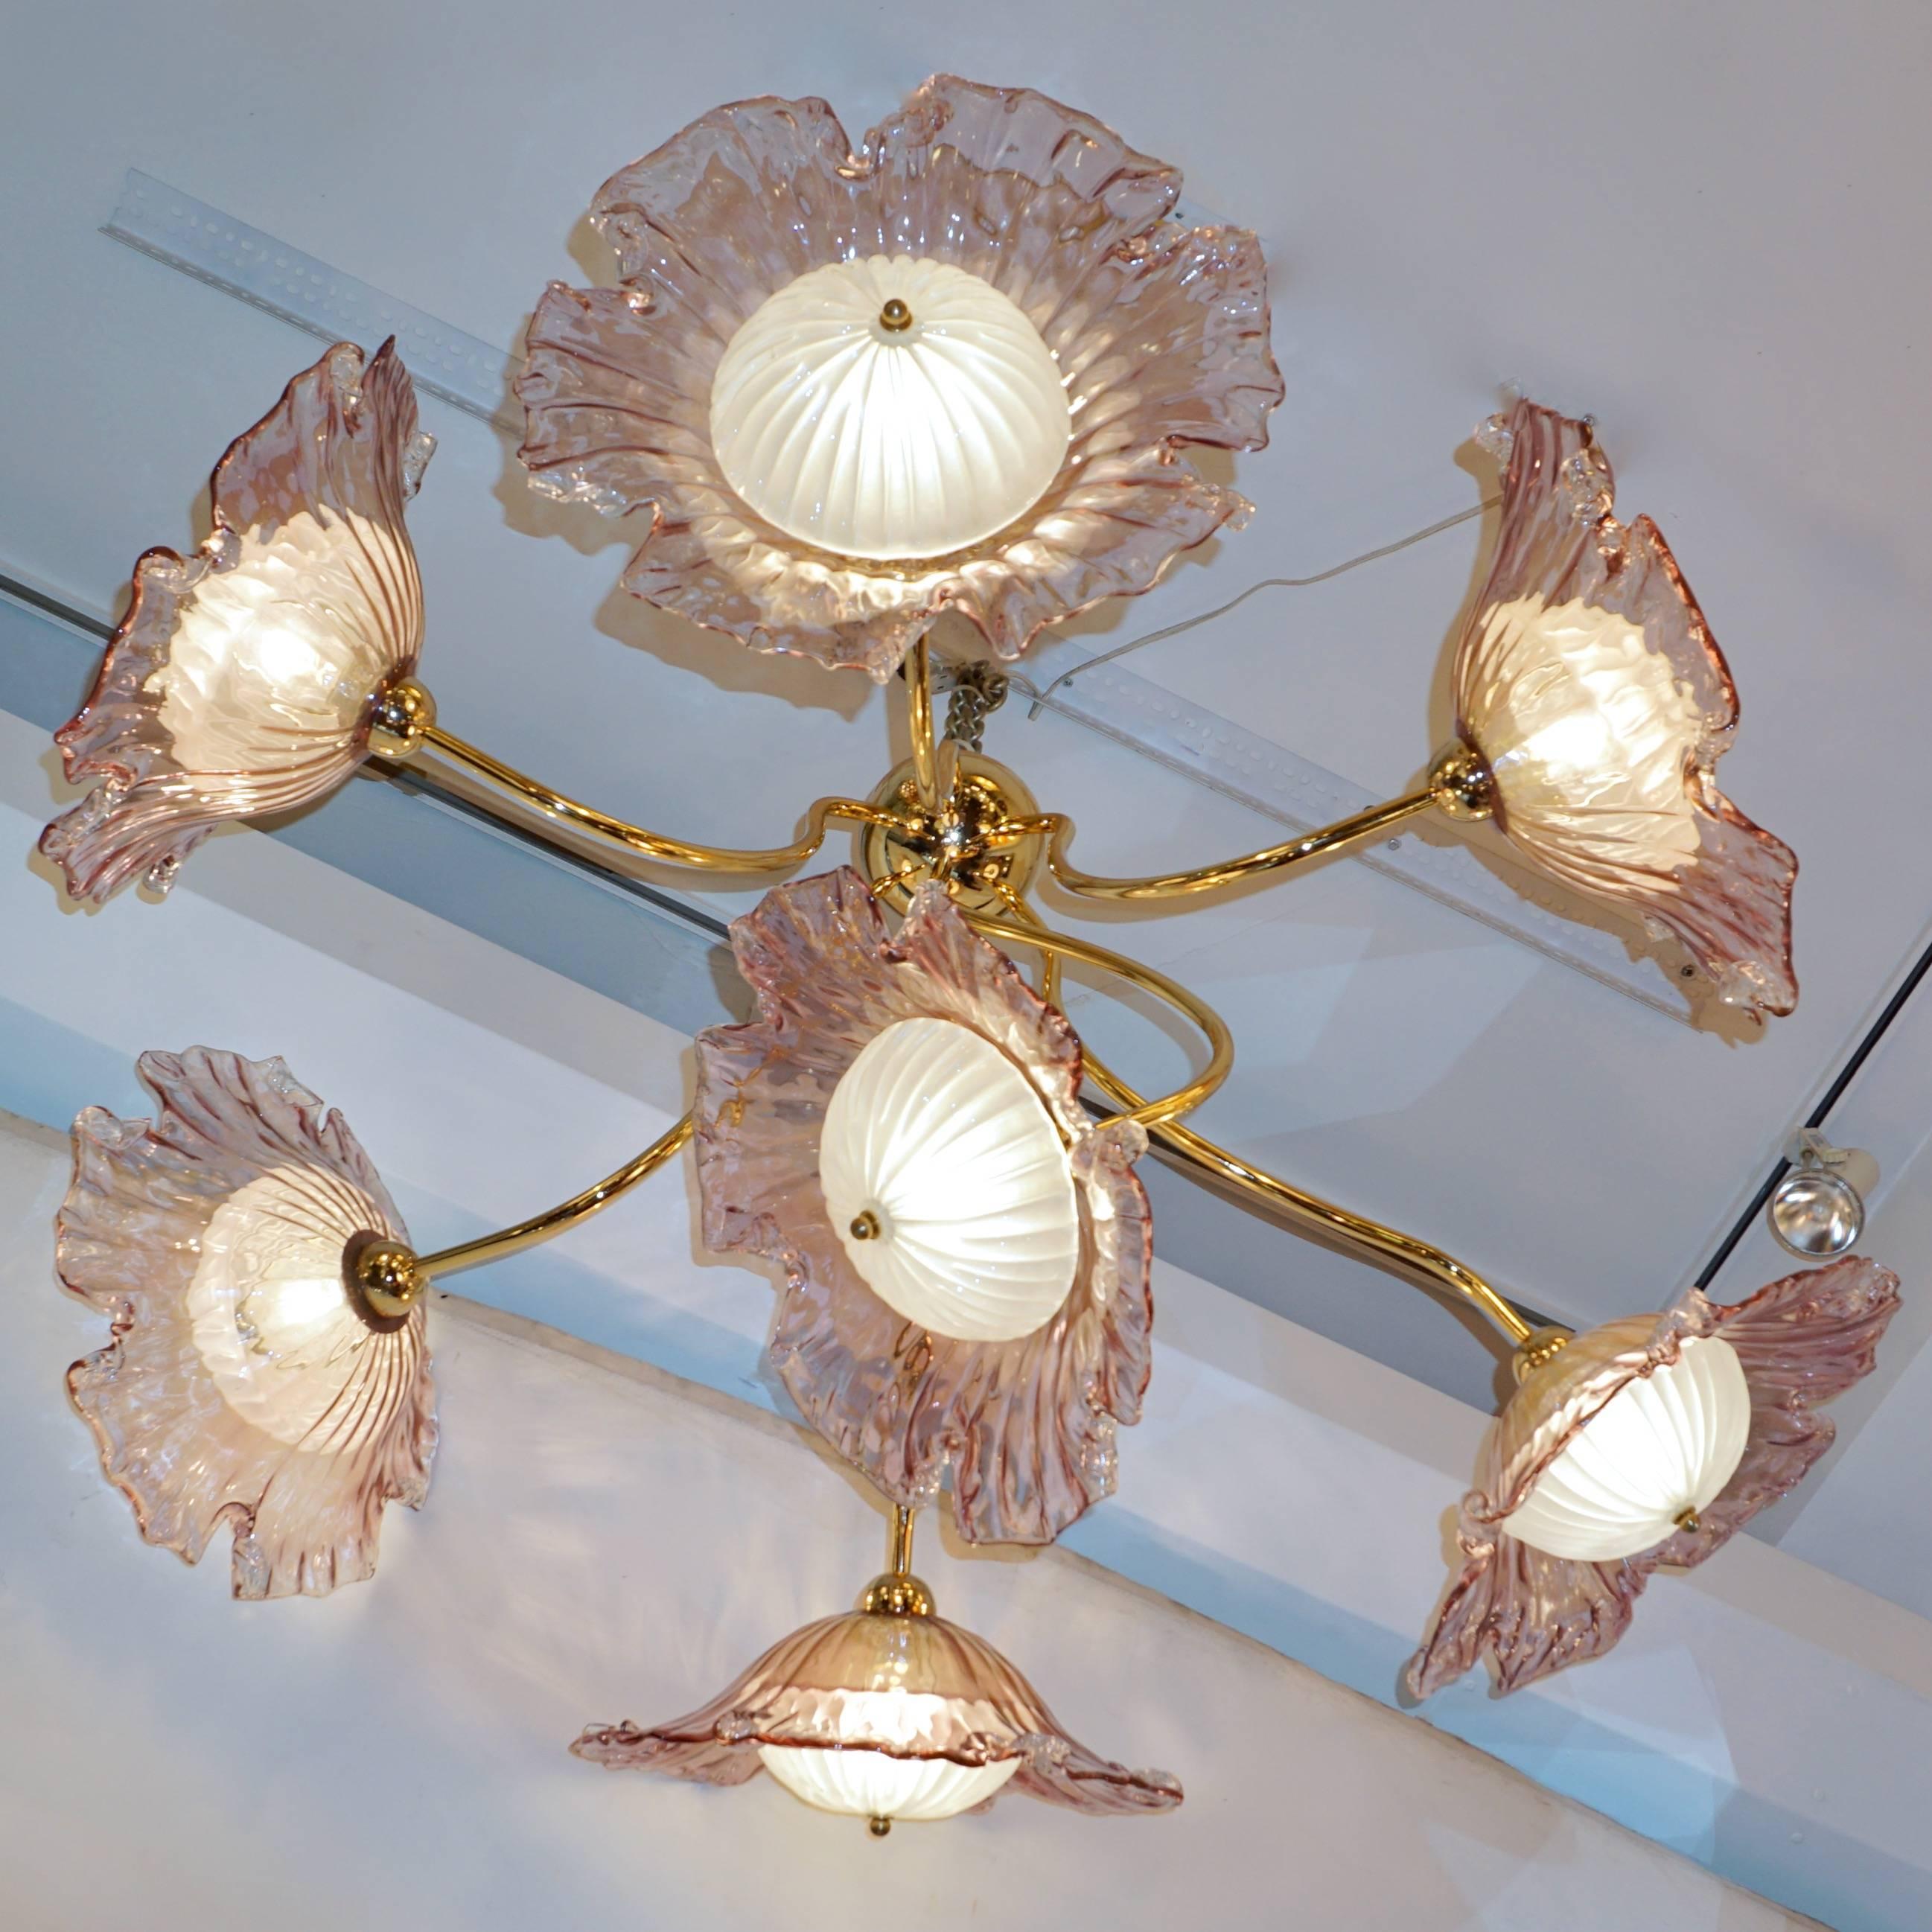 A one of a kind unusual Italian Fine design seven-light chandelier, entirely handmade in Italy on a handcrafted brass structure, a unique sculpture creation of a lavender pink Murano glass flower composition flowing out of a canopy that can be flush